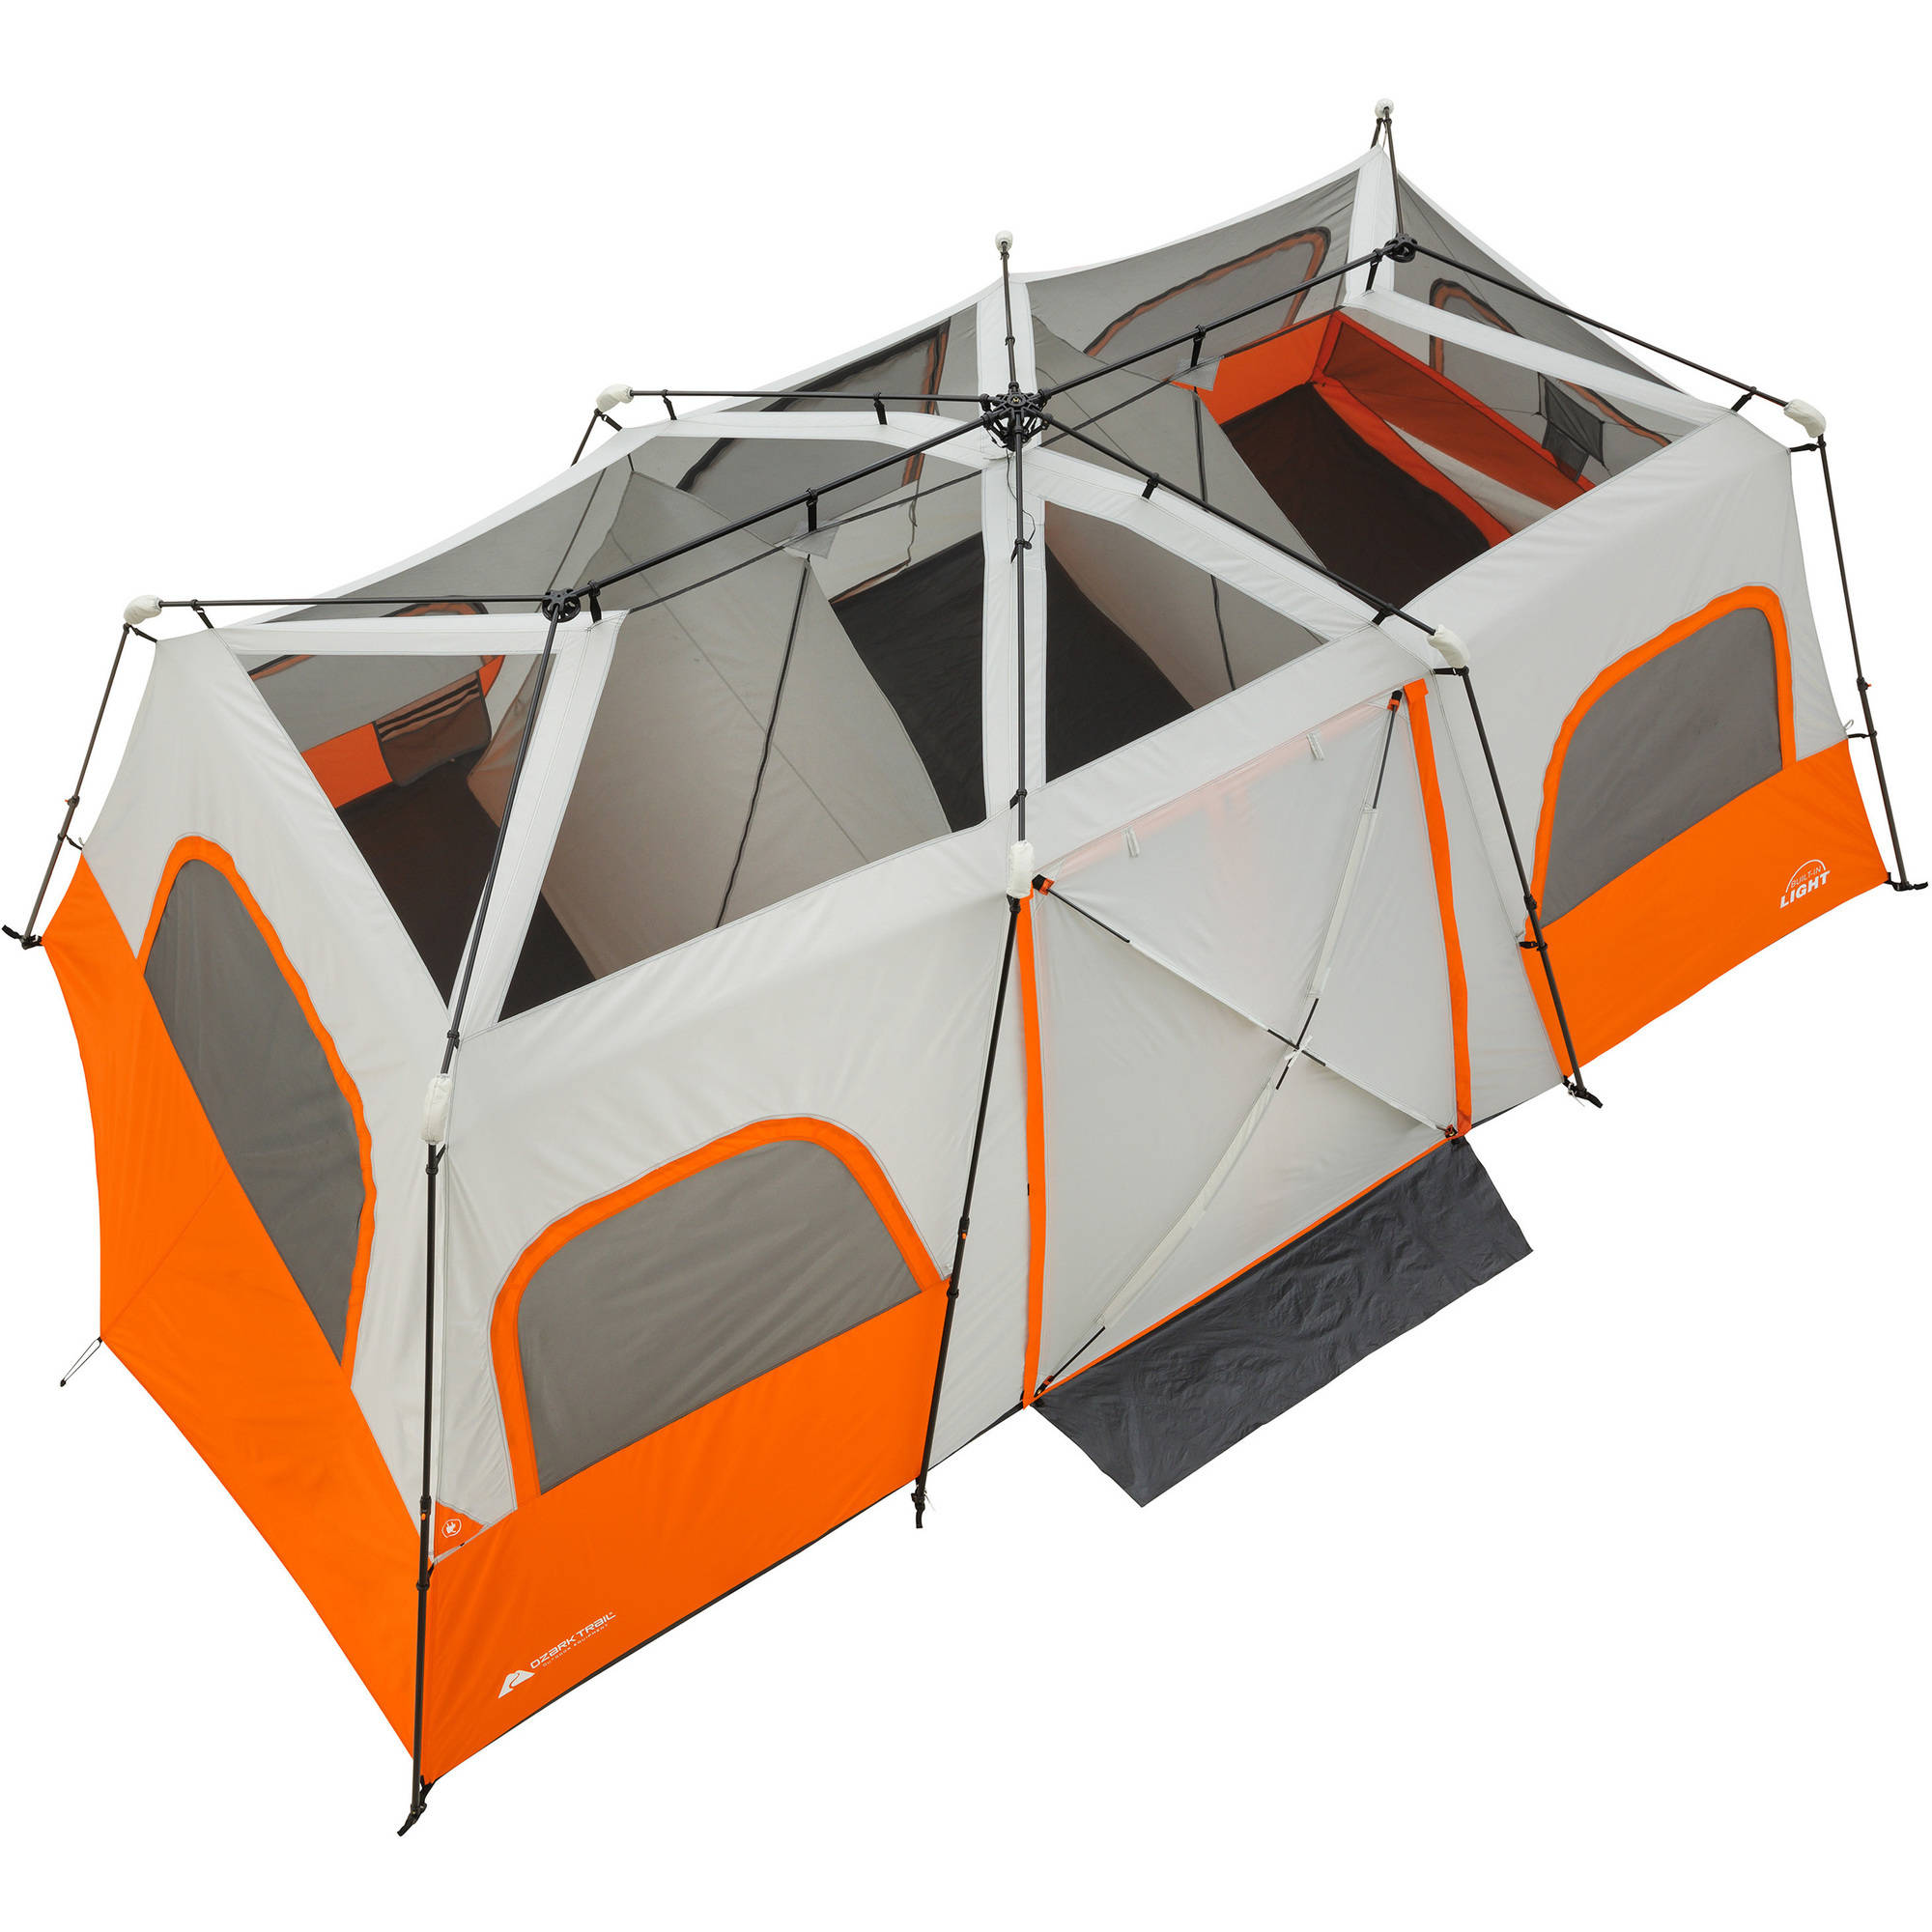 Ozark Trail 12 Person Instant Cabin Tent with Integrated LED Lights, 3 Rooms, 47.87 lbs - image 4 of 17